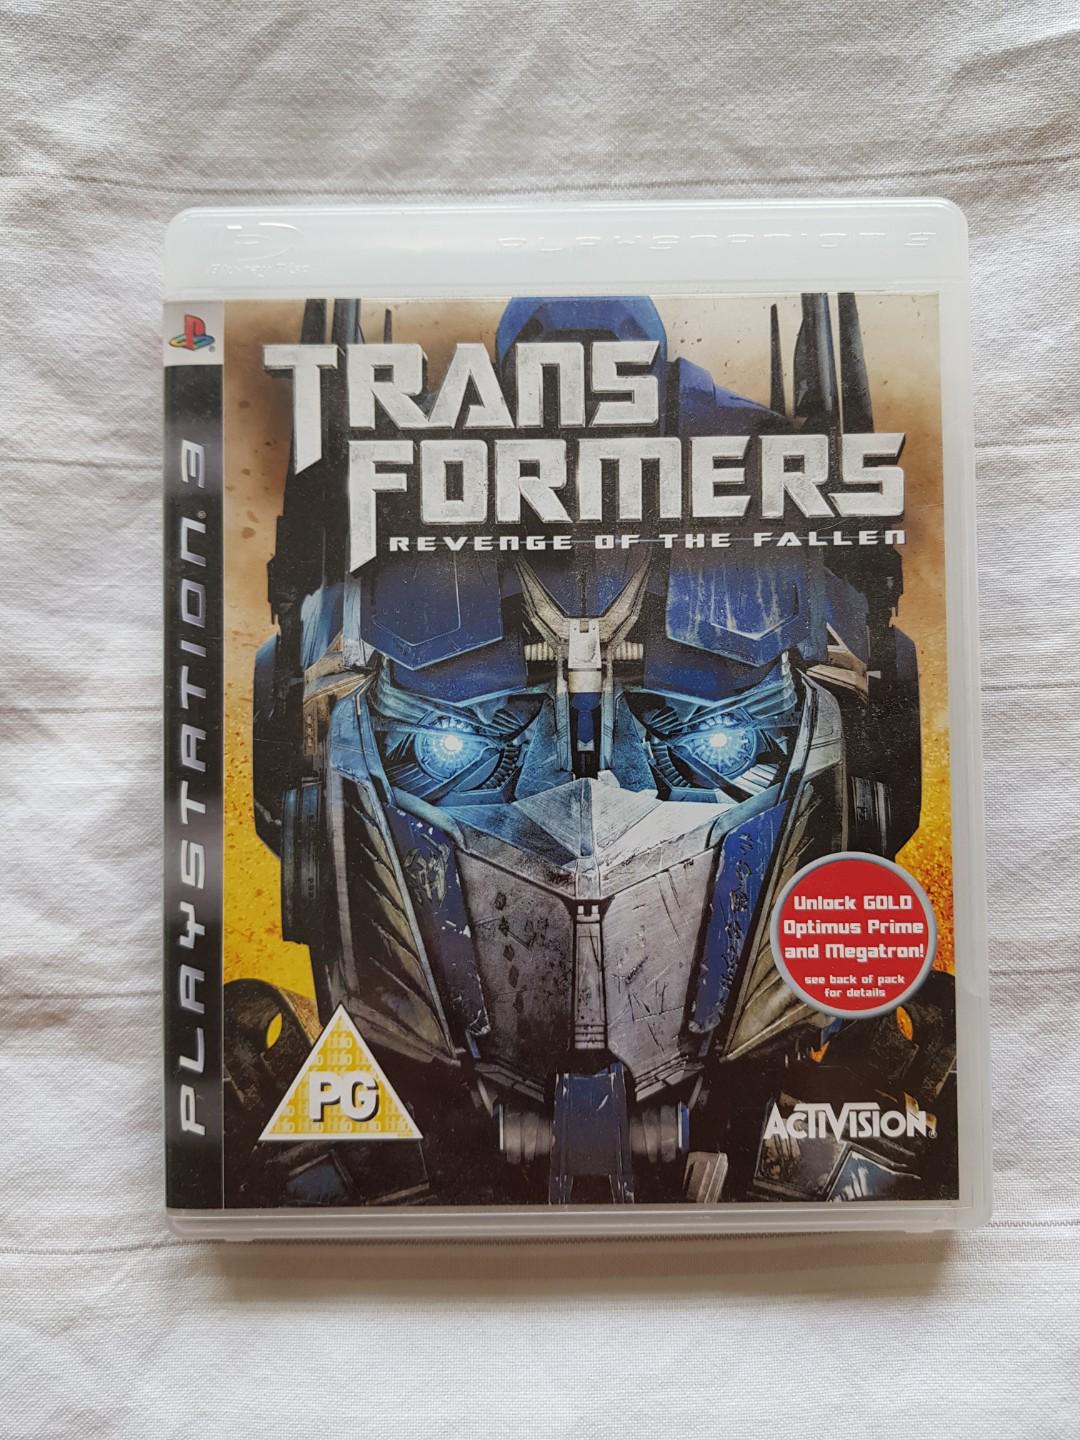 transformers video game ps3